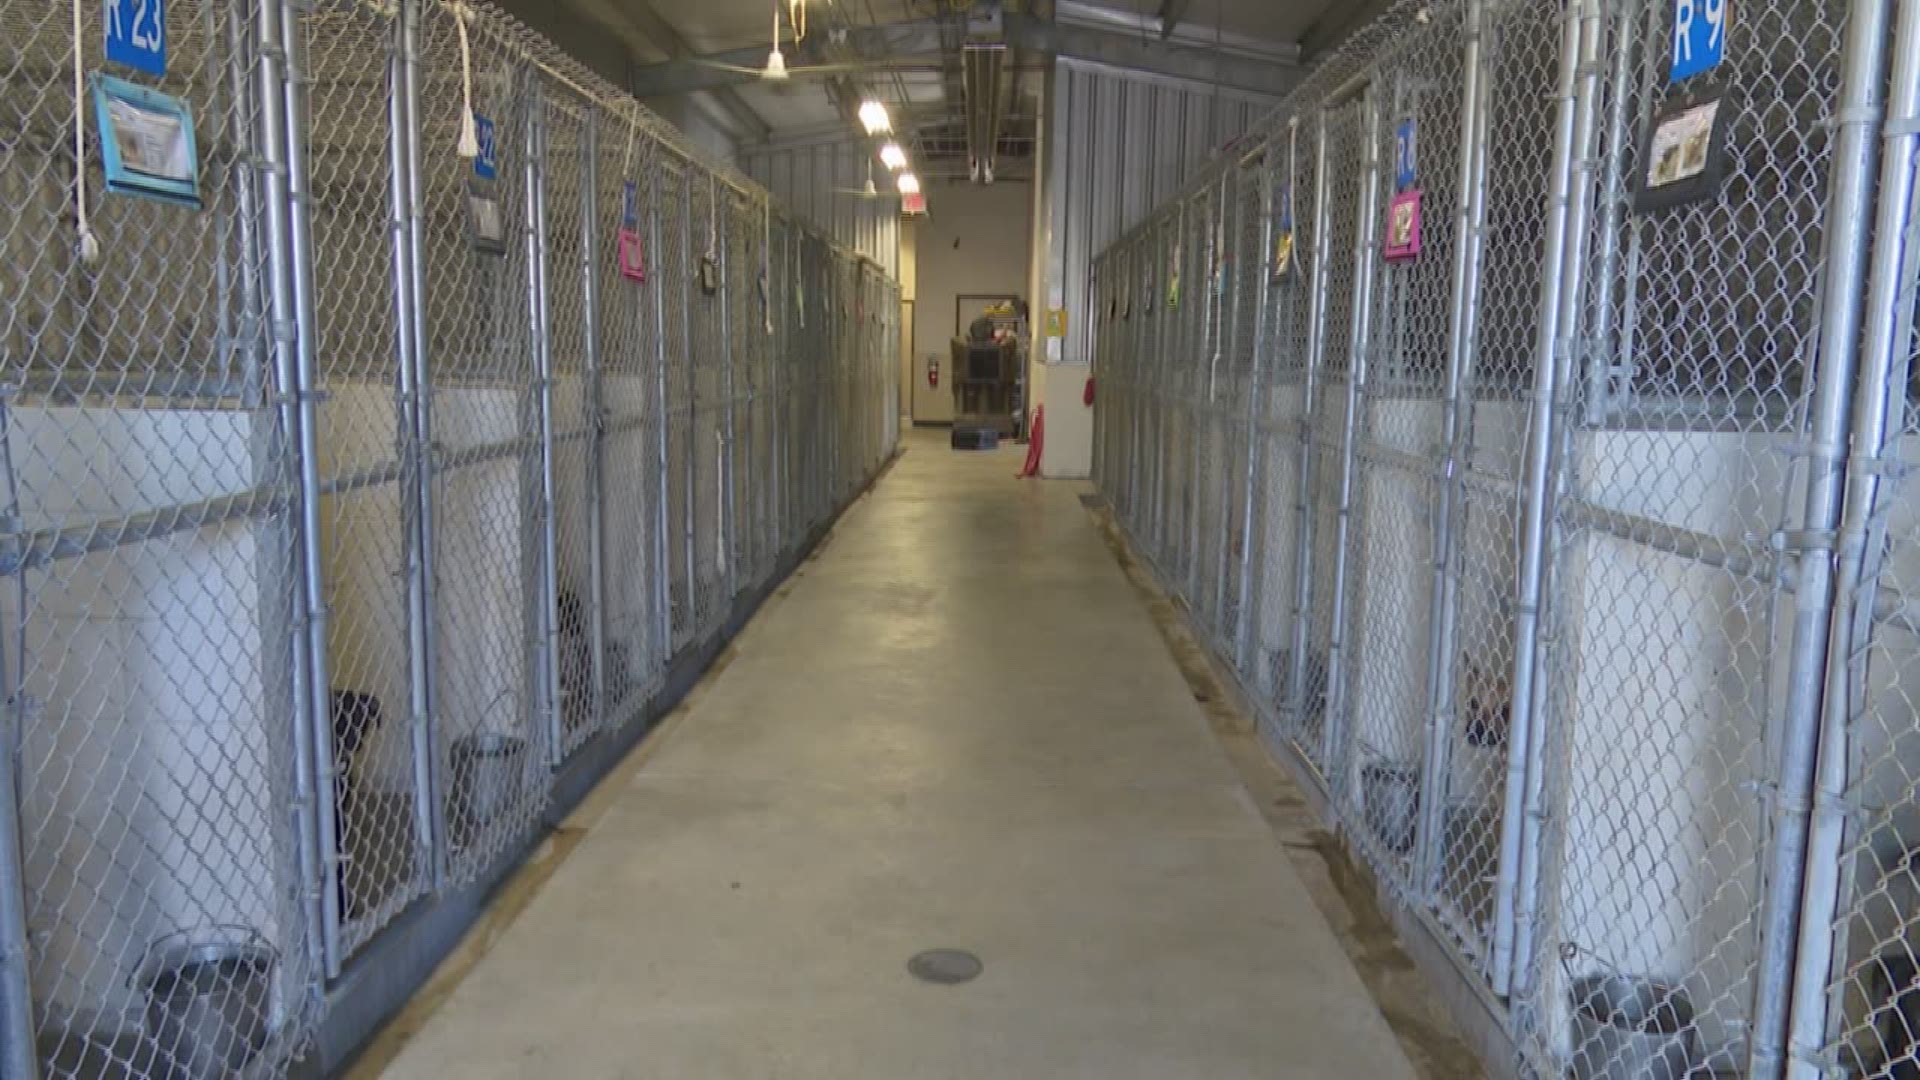 KHOU 11 reporter Brandi Smith looks into what pet owners and those who don't own pets can do to help with the overcrowded animal shelters in Houston.